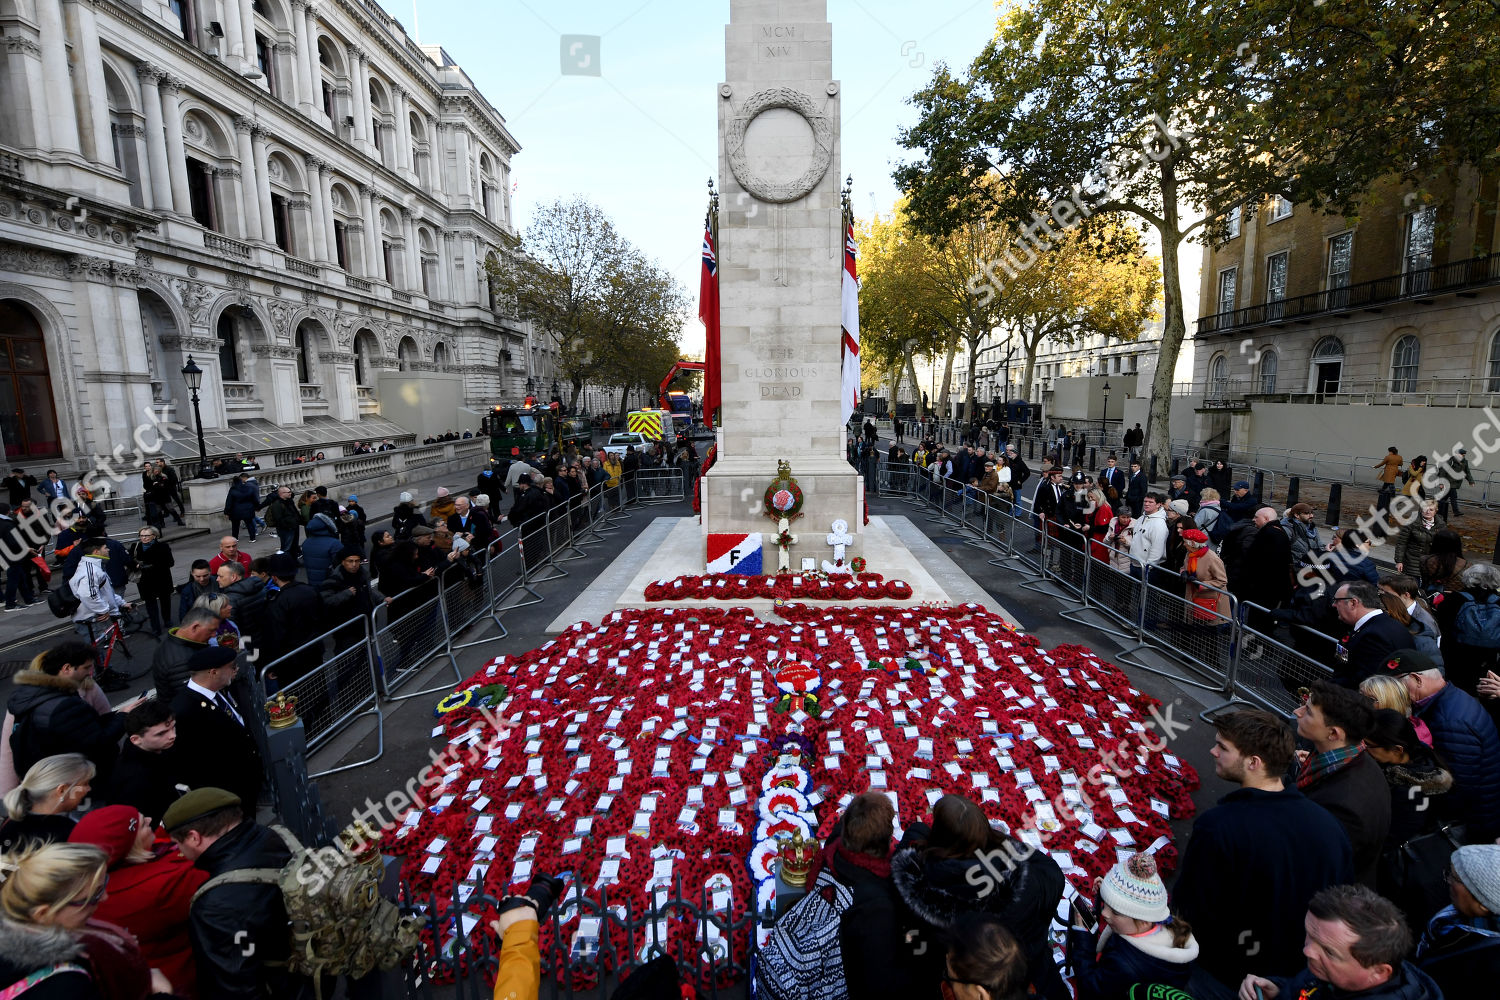 remembrance-day-service-the-cenotaph-whitehall-london-uk-shutterstock-editorial-10469662dn.jpg